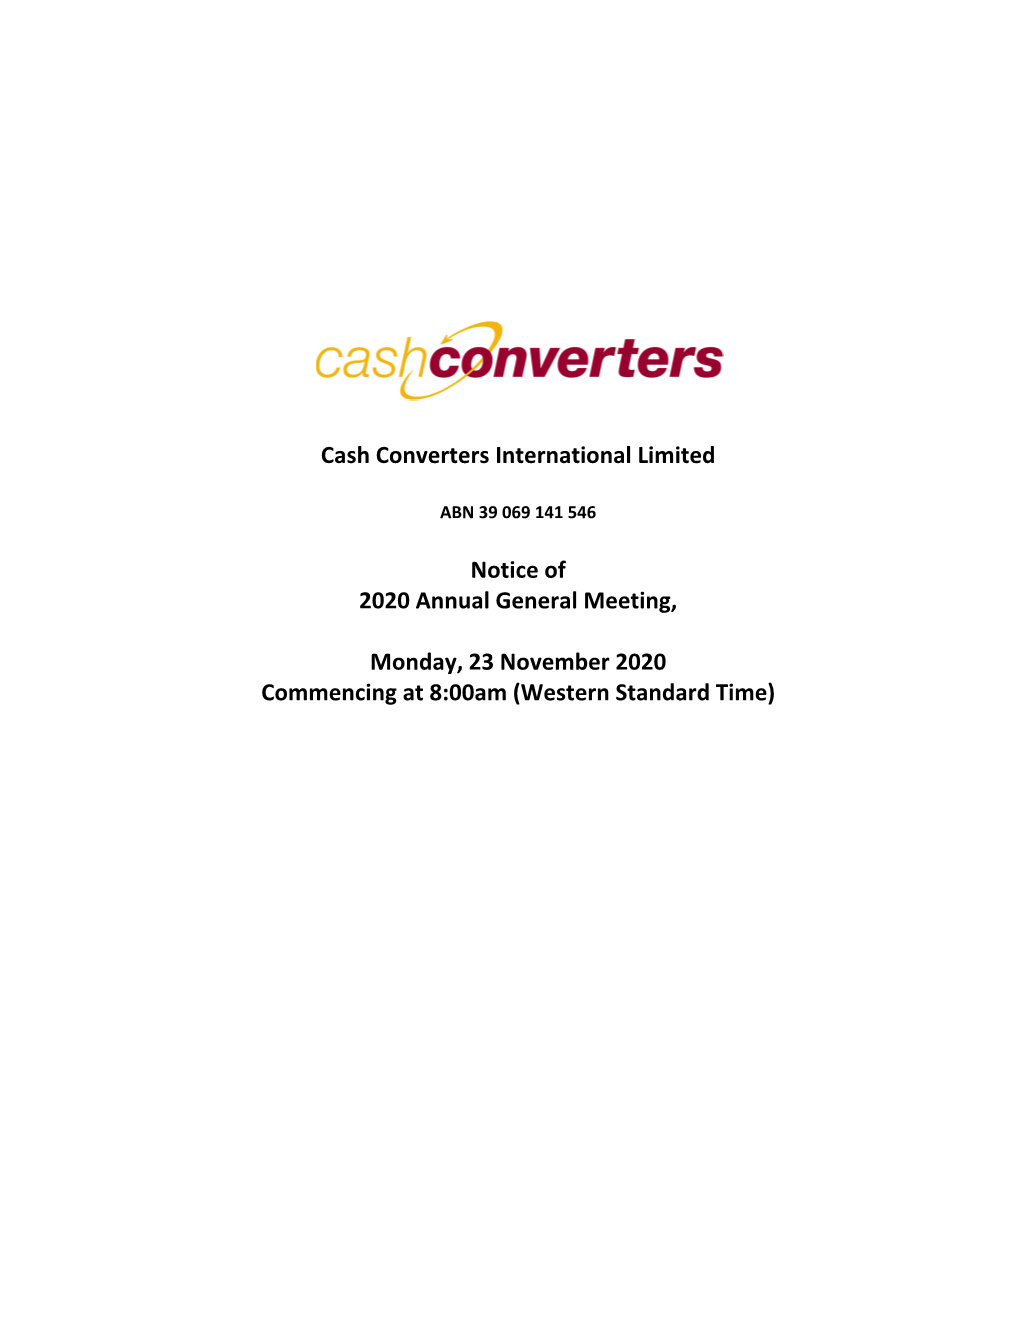 Cash Converters International Limited Notice of 2020 Annual